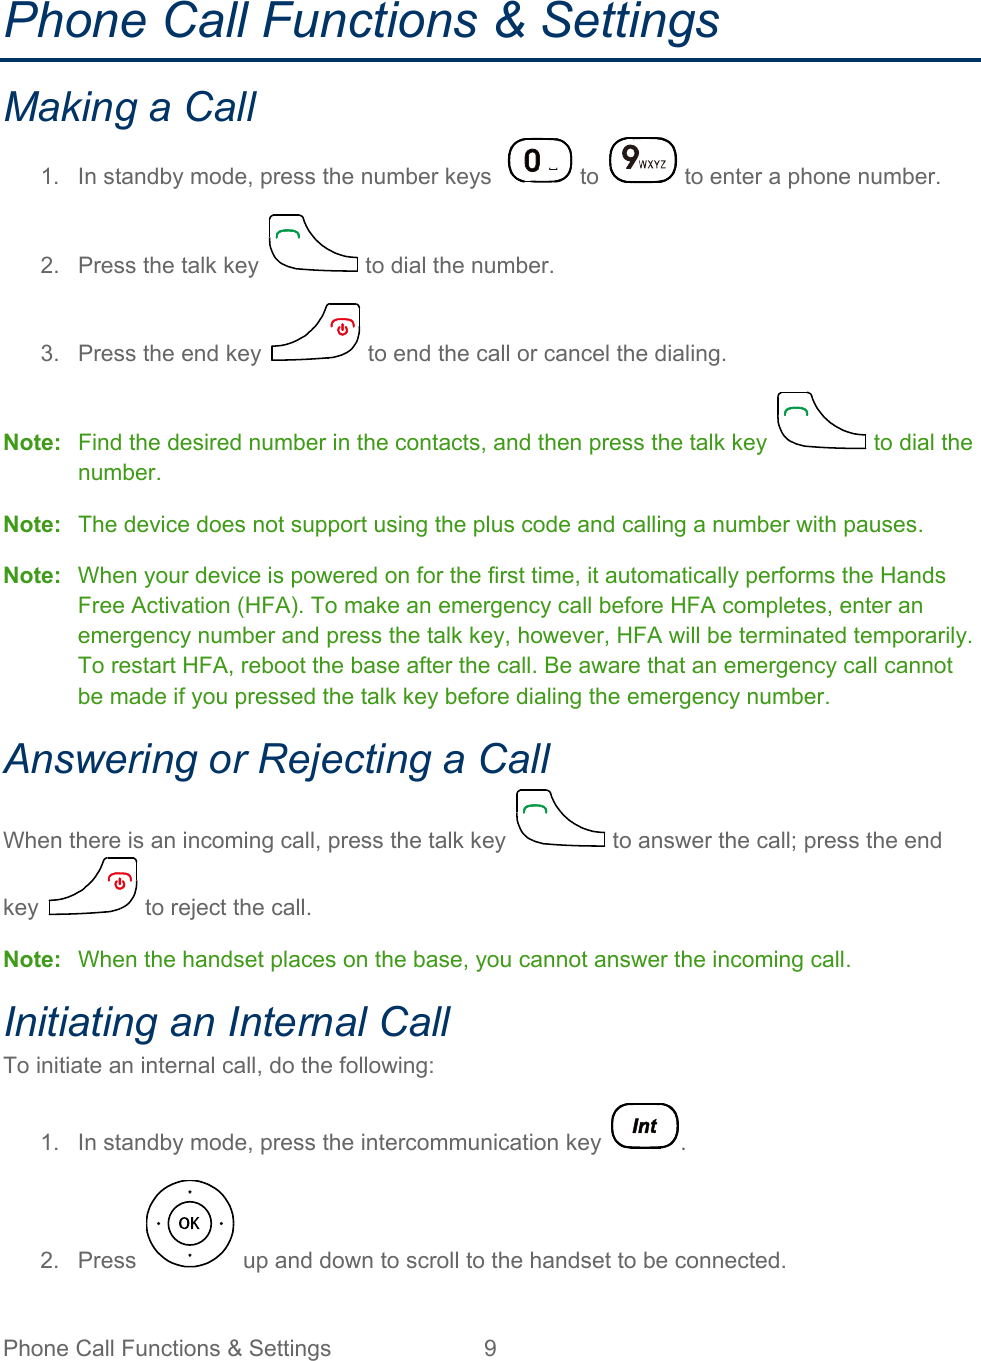 Phone Call Functions &amp; Settings  9   Phone Call Functions &amp; Settings Making a Call 1. In standby mode, press the number keys    to   to enter a phone number. 2.  Press the talk key   to dial the number. 3.  Press the end key   to end the call or cancel the dialing. Note: Find the desired number in the contacts, and then press the talk key   to dial the number. Note:  The device does not support using the plus code and calling a number with pauses. Note: When your device is powered on for the first time, it automatically performs the Hands Free Activation (HFA). To make an emergency call before HFA completes, enter an emergency number and press the talk key, however, HFA will be terminated temporarily. To restart HFA, reboot the base after the call. Be aware that an emergency call cannot be made if you pressed the talk key before dialing the emergency number. Answering or Rejecting a Call When there is an incoming call, press the talk key   to answer the call; press the end key   to reject the call. Note: When the handset places on the base, you cannot answer the incoming call. Initiating an Internal Call To initiate an internal call, do the following: 1. In standby mode, press the intercommunication key  . 2.  Press   up and down to scroll to the handset to be connected. 